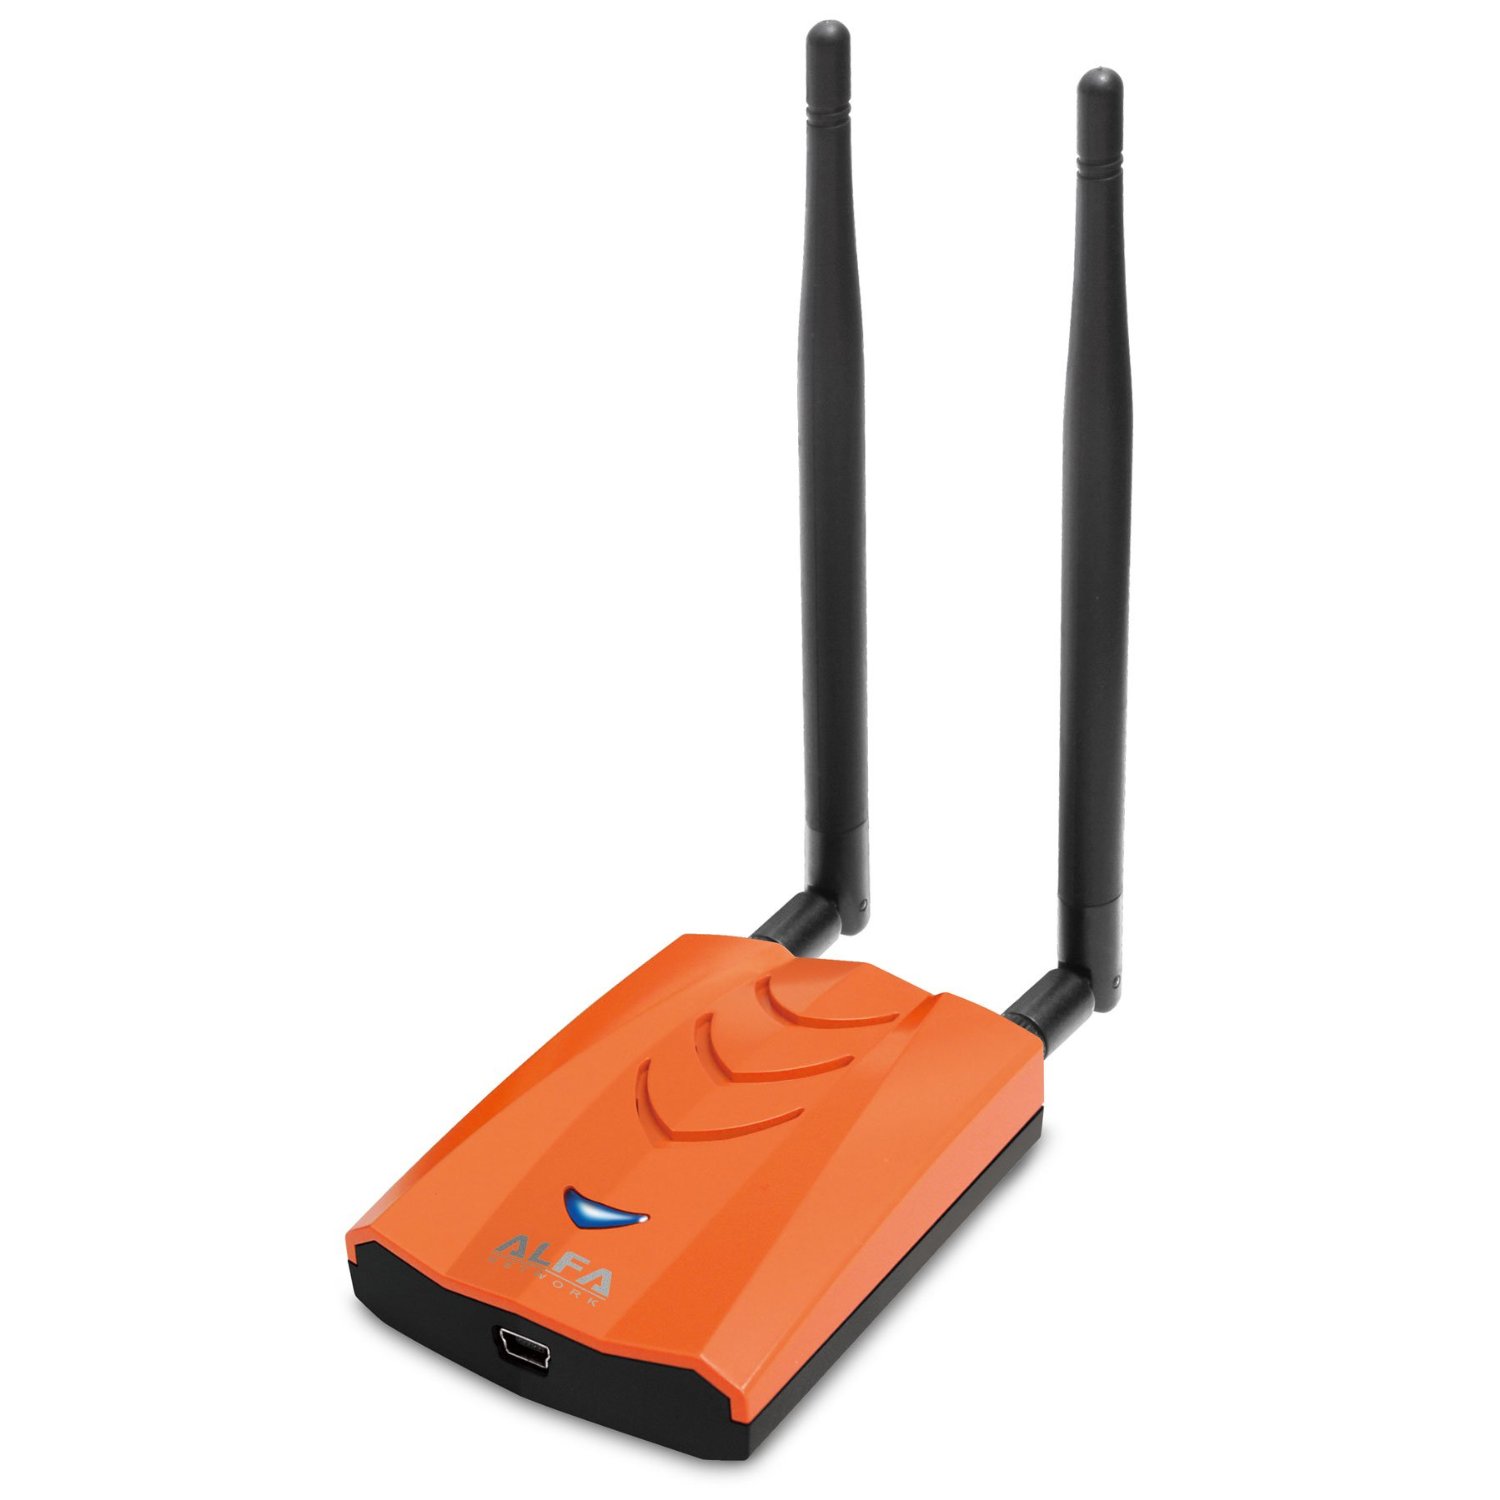 Alfa wireless drivers download awus036h